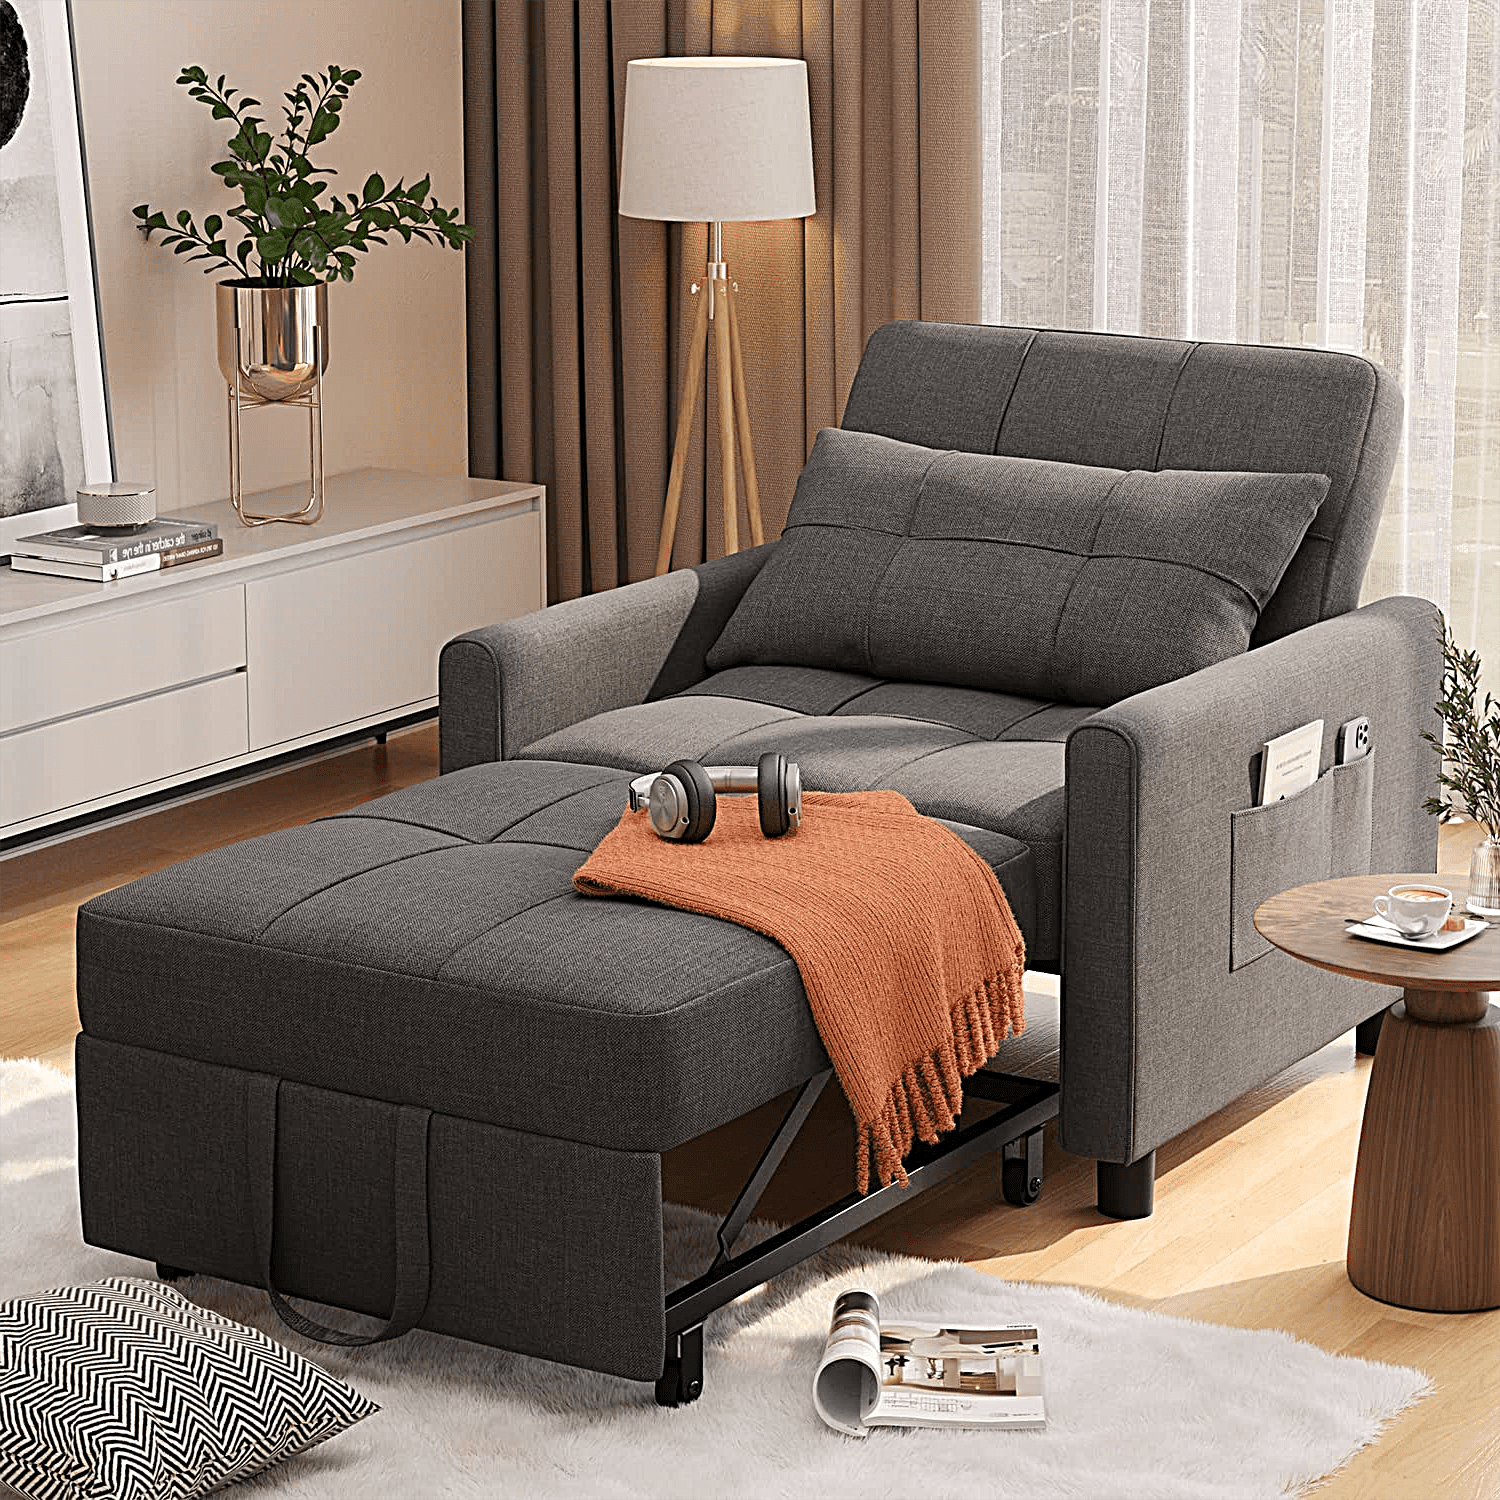 Aiho Convertible Sleeper Sofa Chair Bed with Pillow and Pocket, 3-in-1  Single Convertible, Adjustable, Multi-Functional with Modern Linen Fabric  for